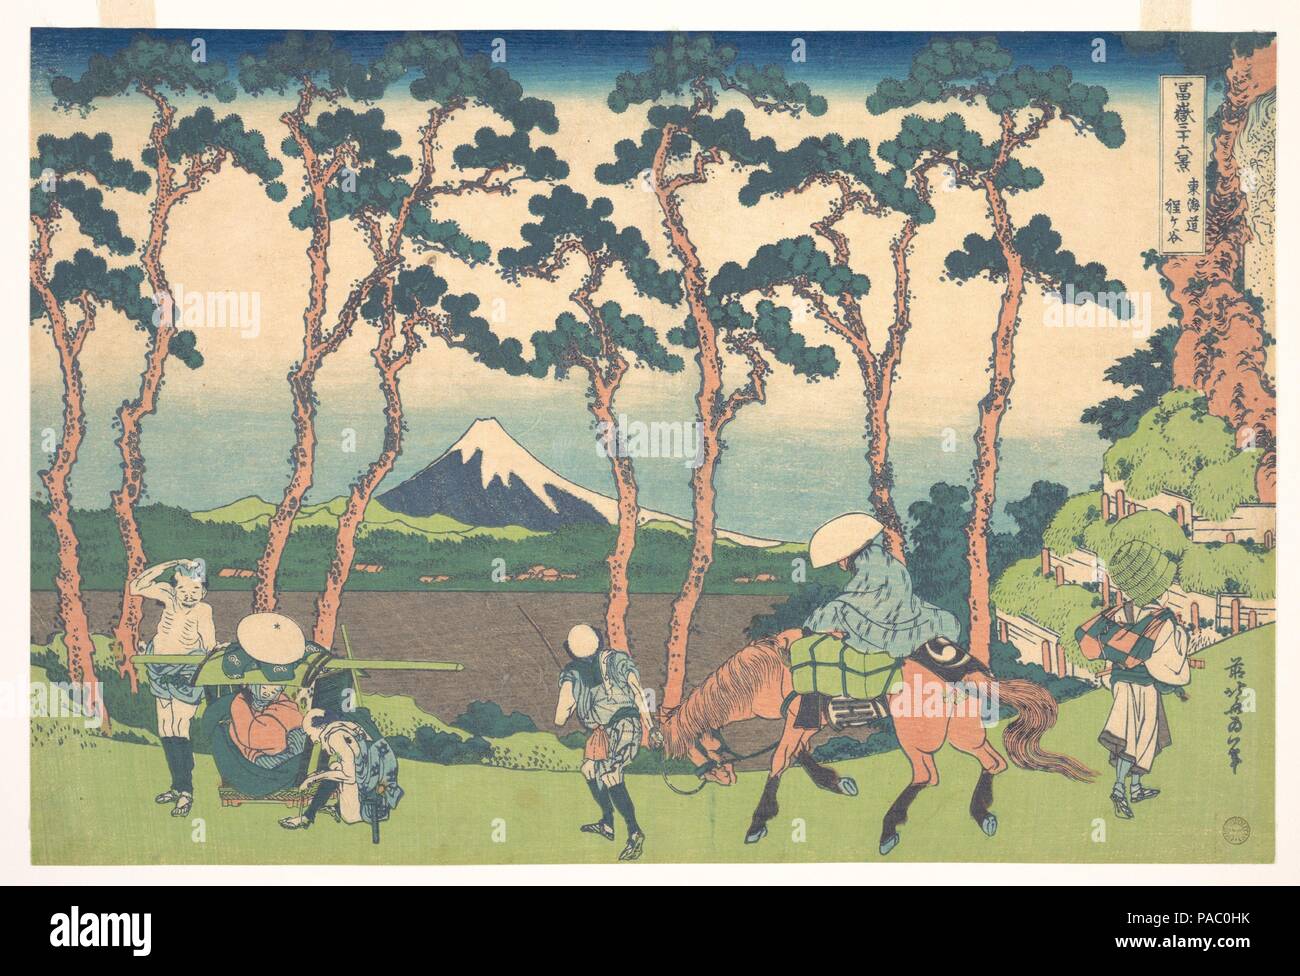 Hodogaya on the Tokaido (Tokaido Hodogaya), from the series Thirty-six Views of Mount Fuji (Fugaku sanjurokkei). Artist: Katsushika Hokusai (Japanese, Tokyo (Edo) 1760-1849 Tokyo (Edo)). Culture: Japan. Dimensions: H. 9 3/4 in. (24.8 cm); W. 14 9/16 in. (37 cm). Date: ca. 1830-32.  Mount Fuji is enclosed by old pine trees that were planted along the highway as shade and shelter for the travelers. The location of this scene is probably the Gondazaka and Shinanozaka, hills that border the Musashi and Sagami provinces. Palanquin bearers at the left are resting after having crossed the hill. The t Stock Photo